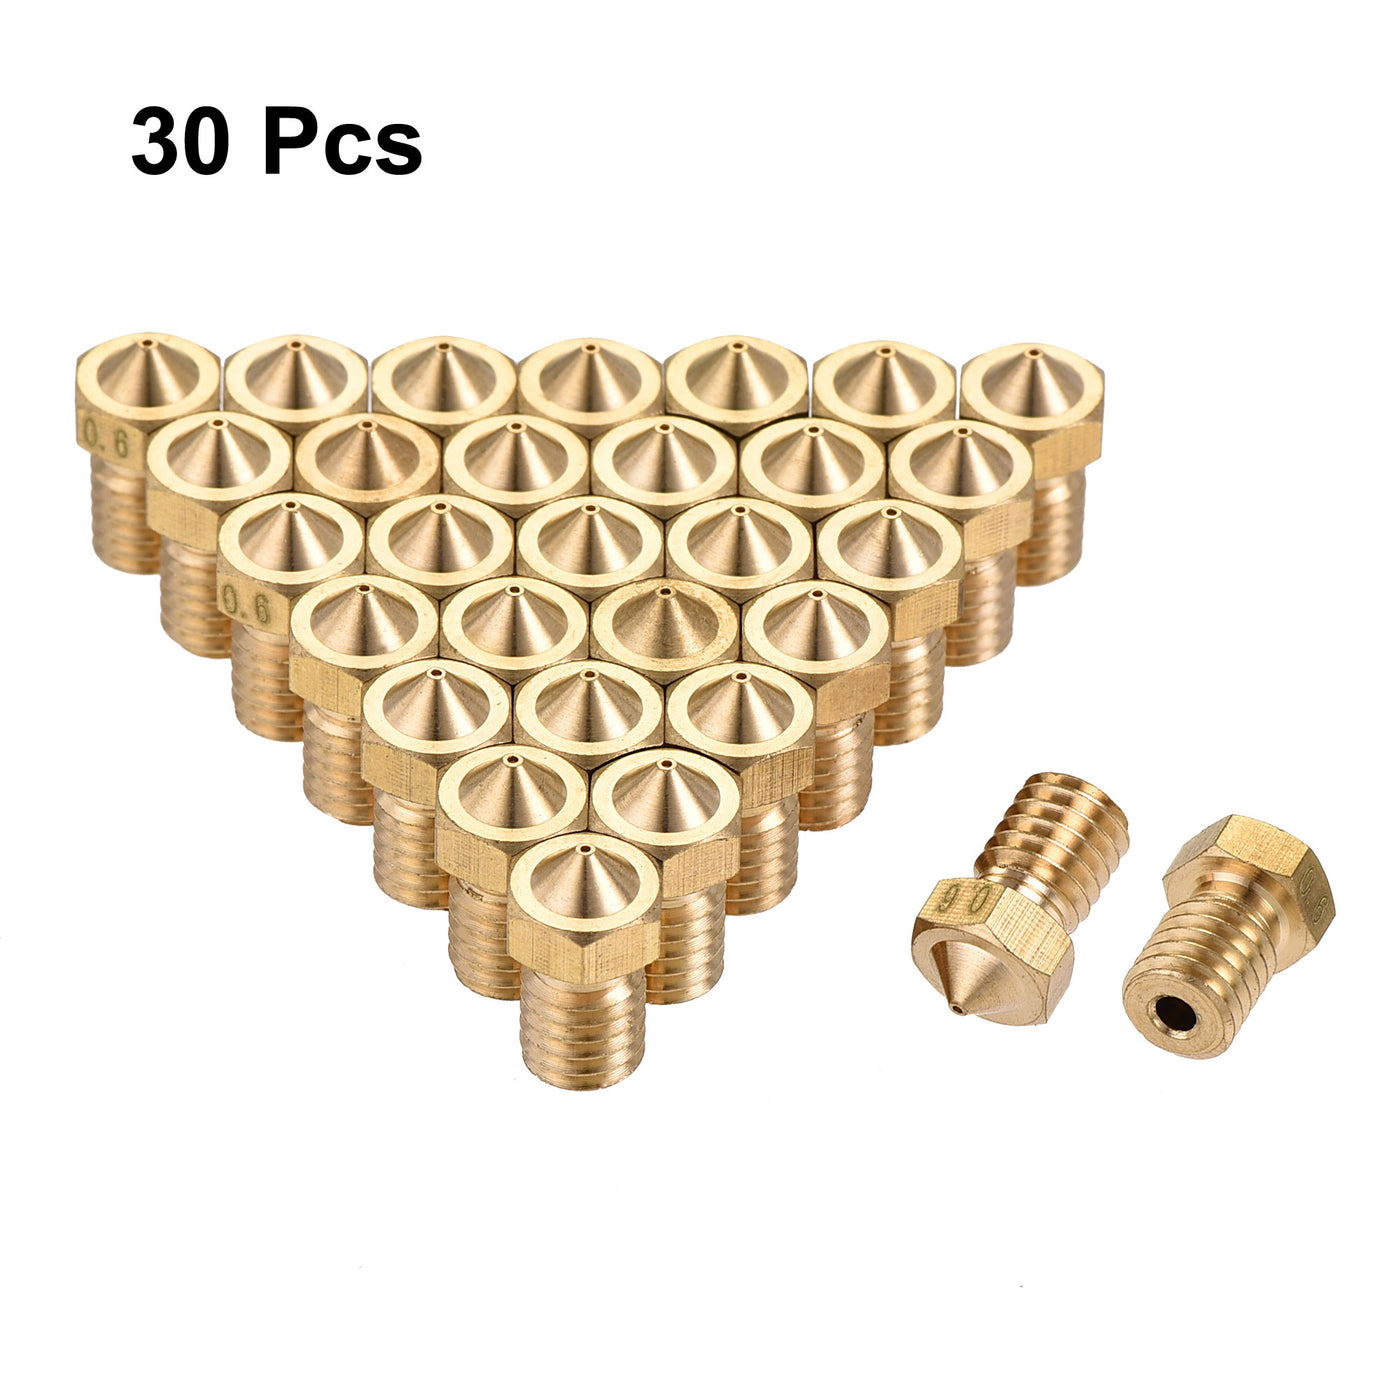 uxcell Uxcell 0.6mm 3D Printer Nozzle, 30pcs M6 Thread for V5 V6 1.75mm Extruder Print, Brass